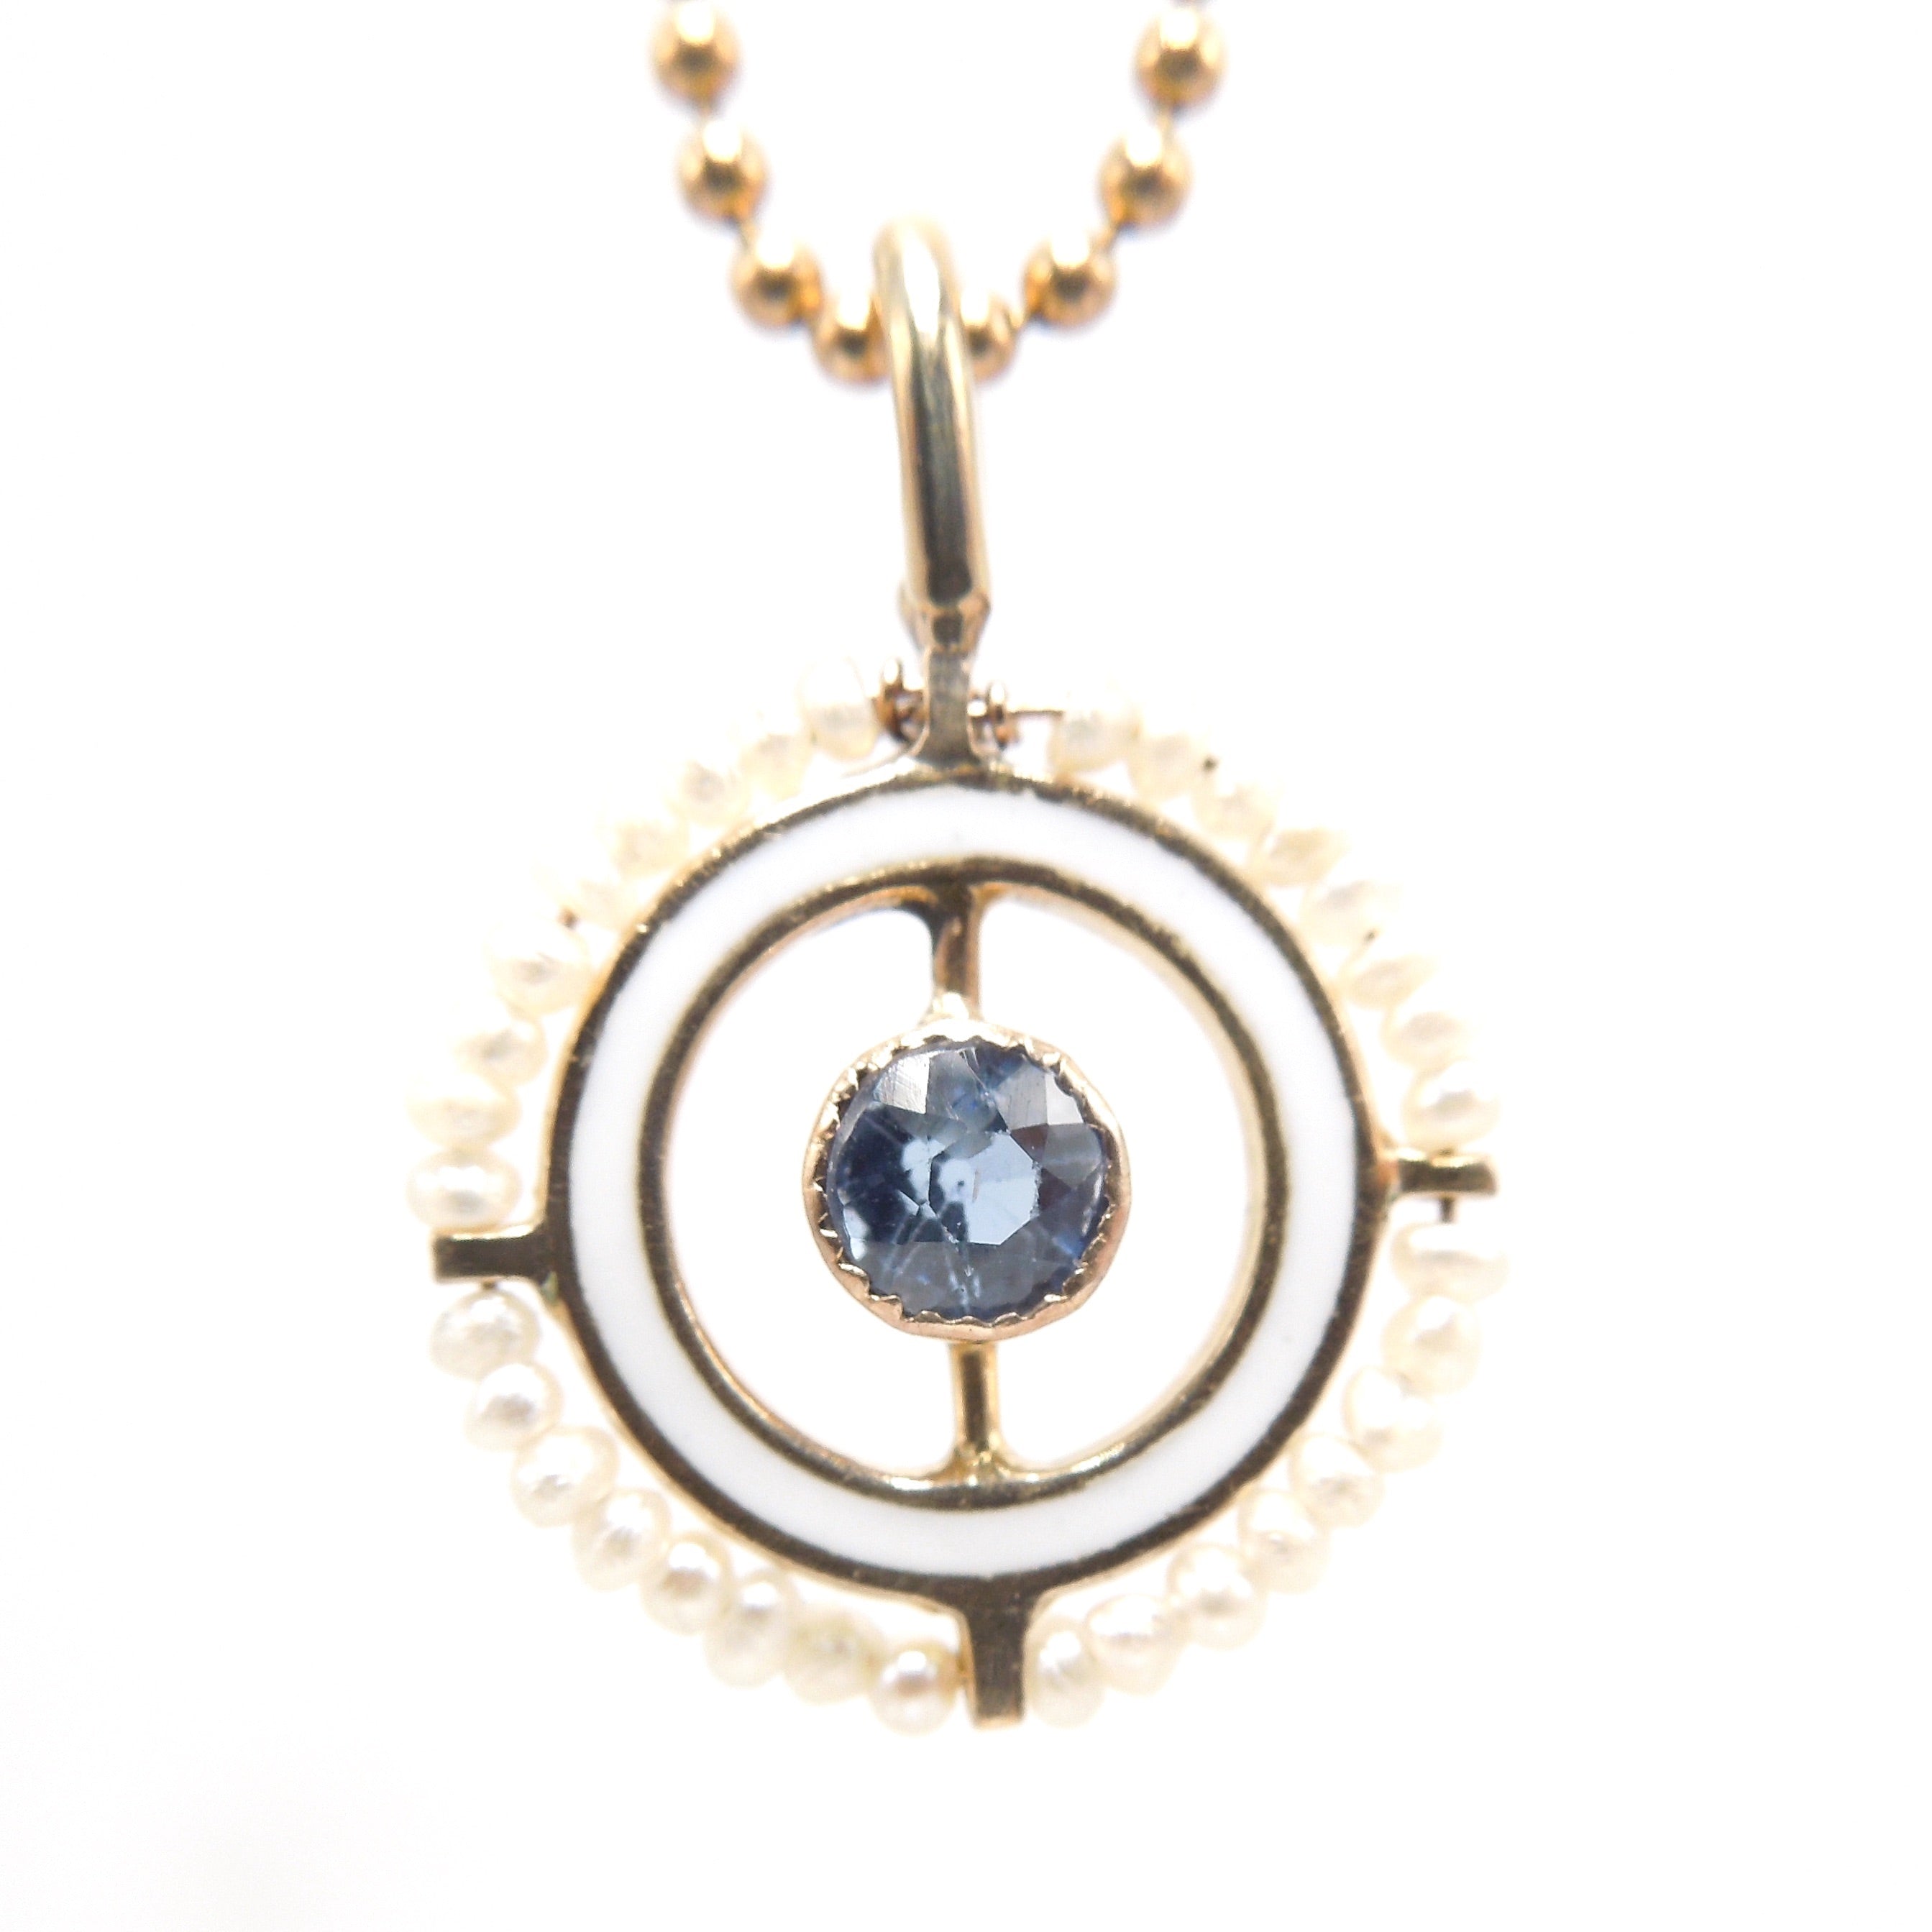 Antique Pearl and Sapphire Compass Pendant in Yellow Gold